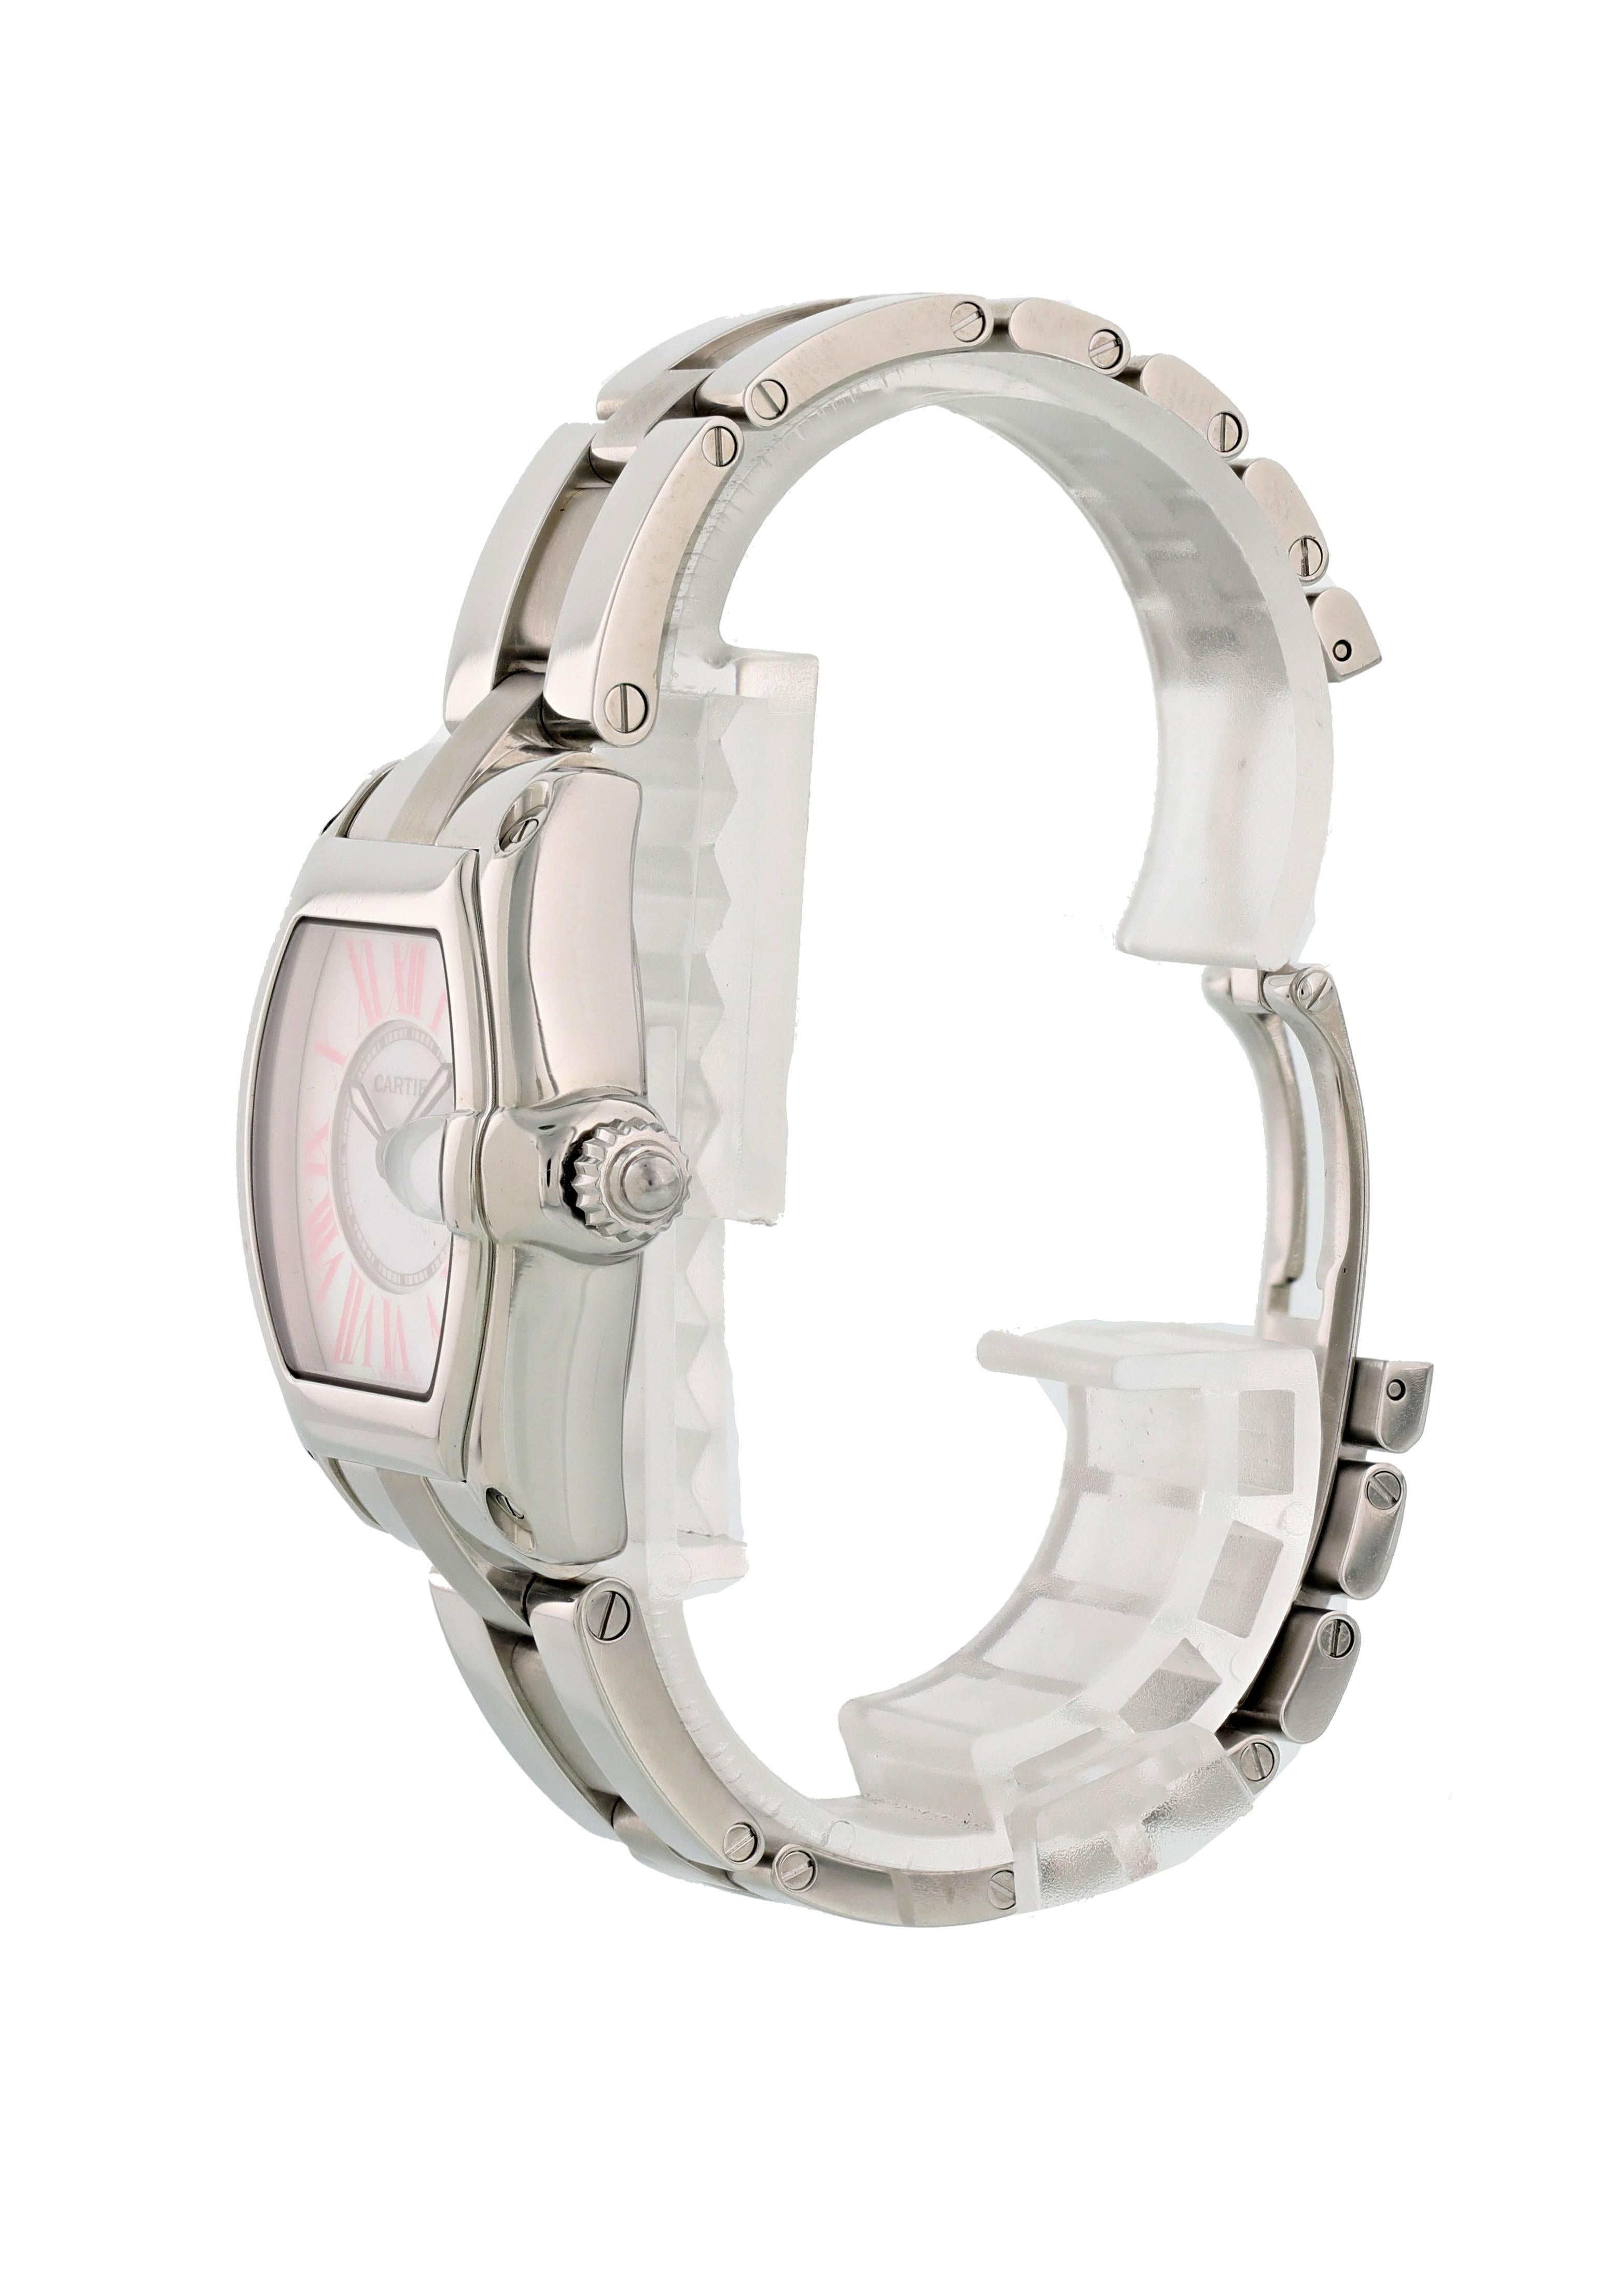 Cartier Roadster 2675 Ladies Watch. 32mm stainless steel case. Mother of pearl dial with luminous steel hands. Pink roman numeral hour markers. Date display by the 3 o'clock position. Stainless steel bracelet with hidden butterfly clasp. Will fit up